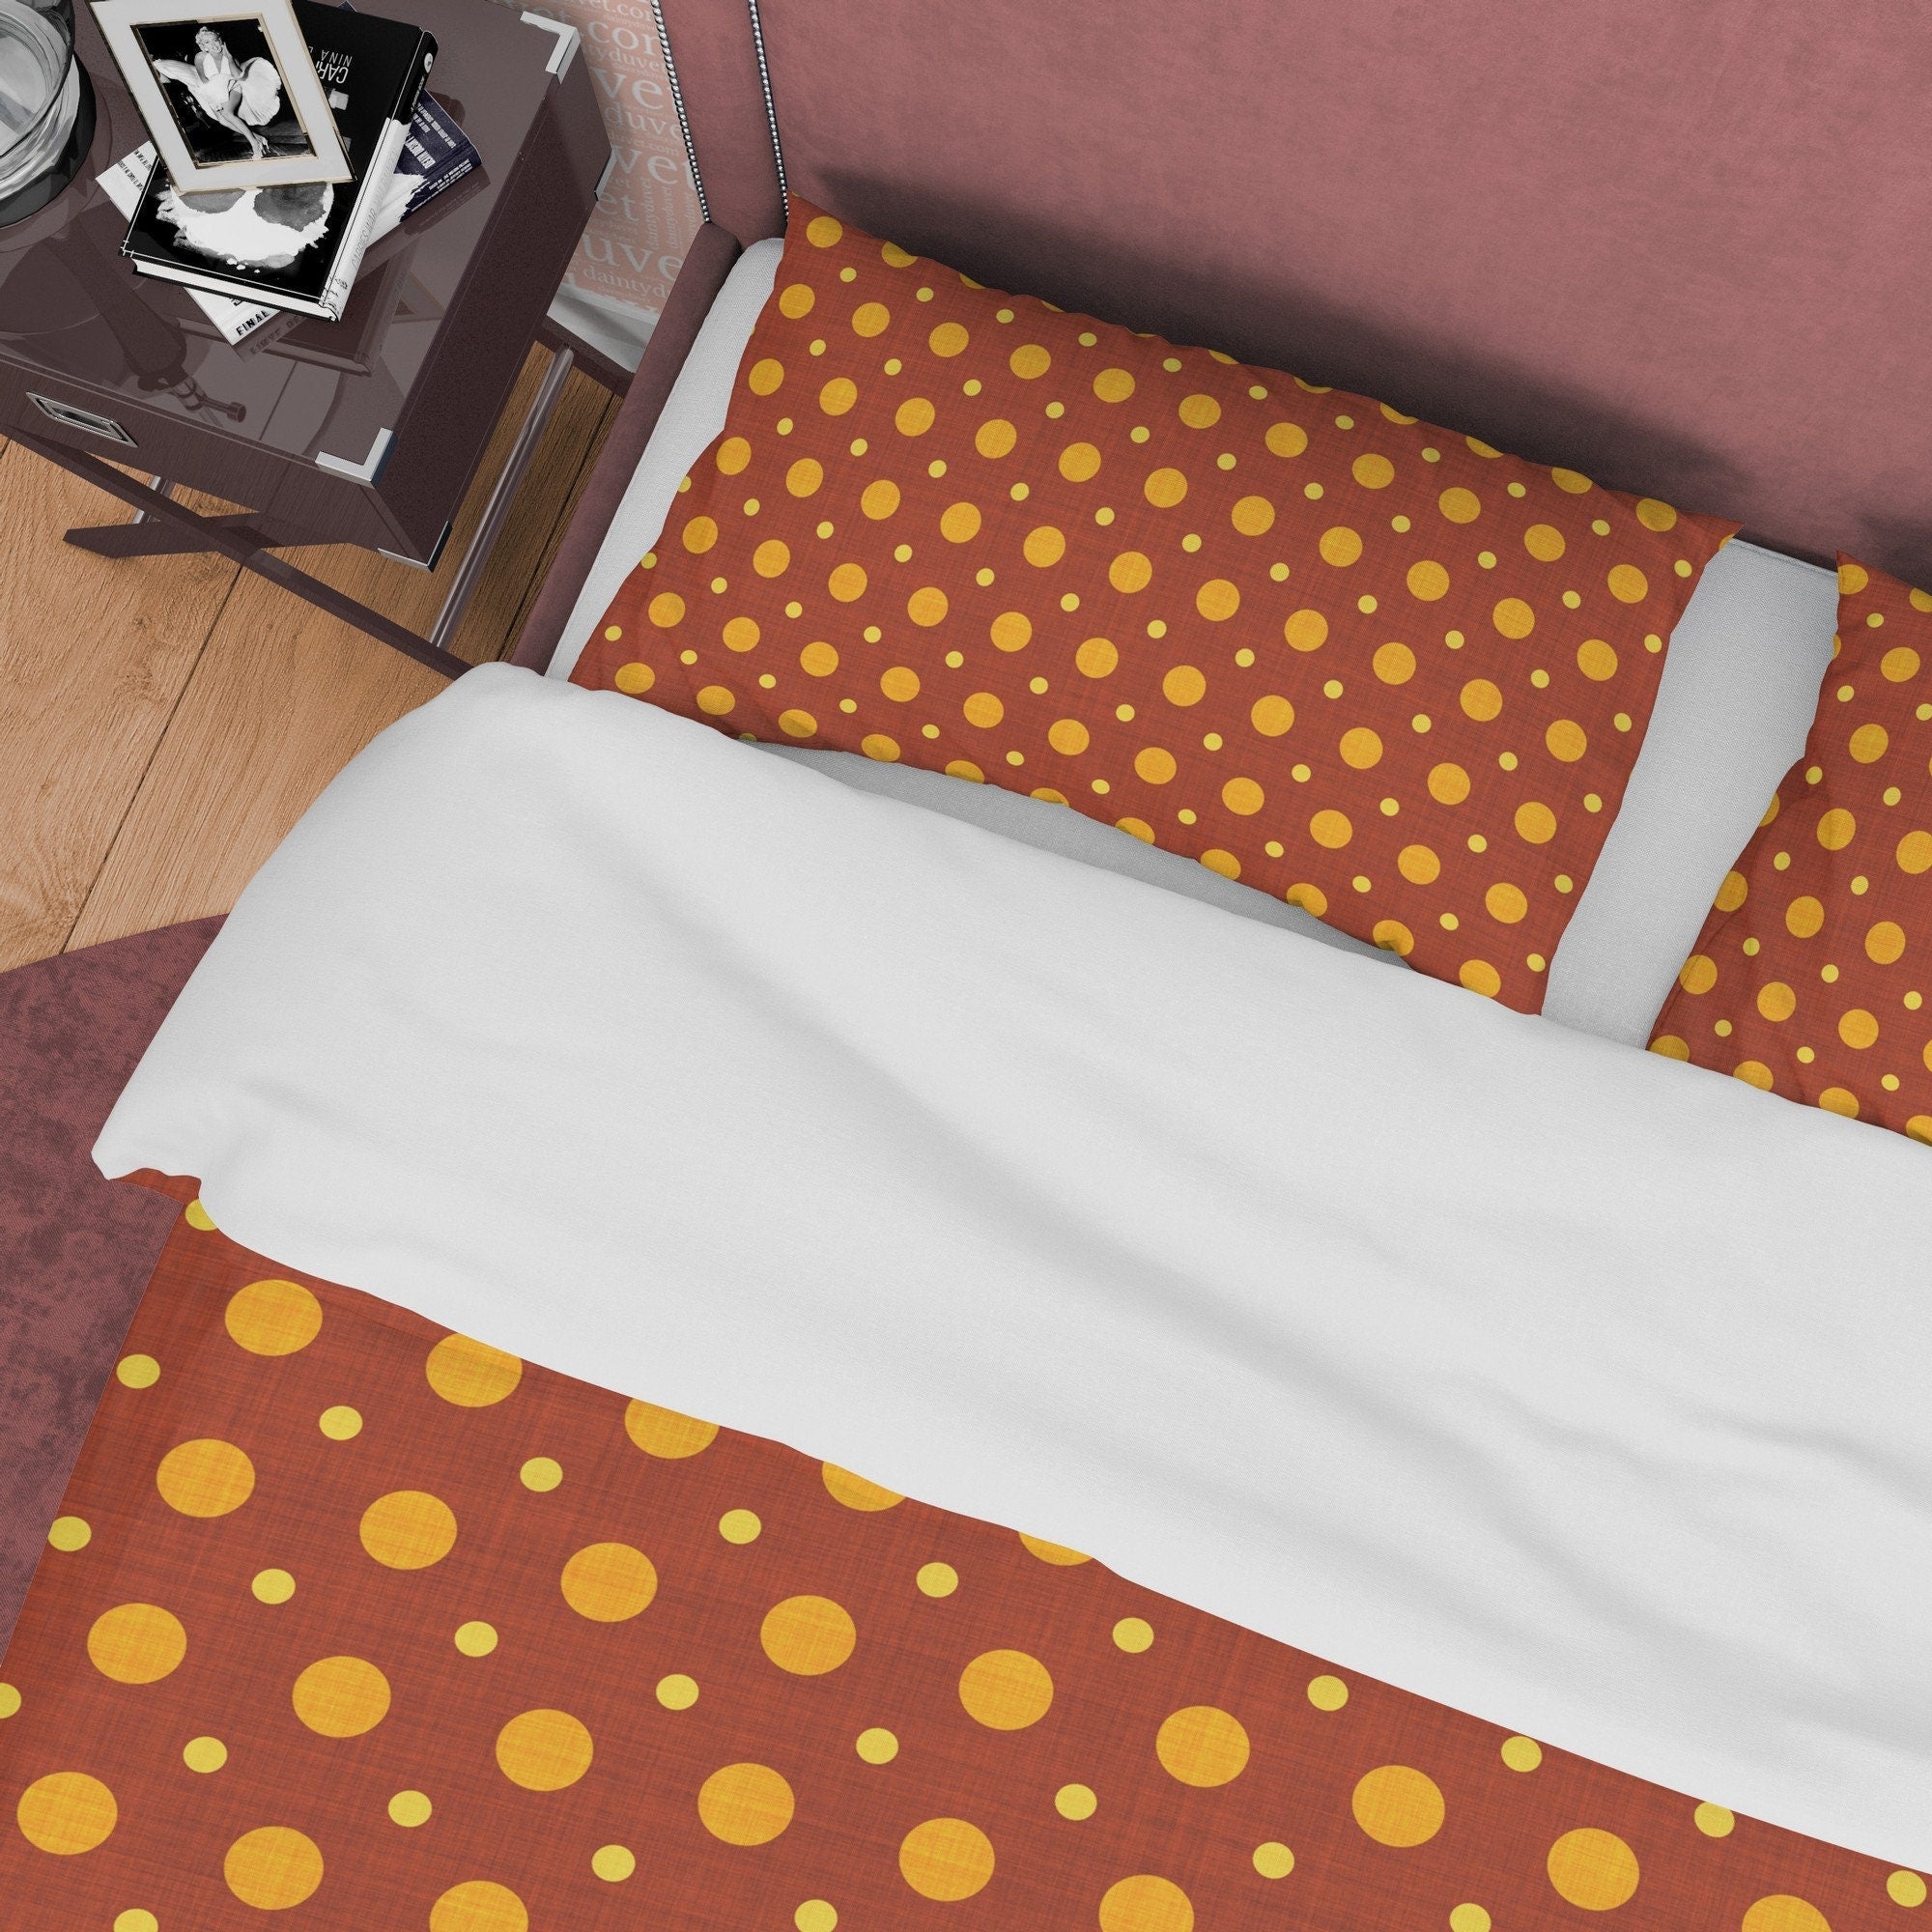 Rustic Brown Polka Dot Duvet Cover Geometric Bedding, Autumn Color Quilt Cover, Mid Century Modern Bedroom Set, Unique Choco Bedspread